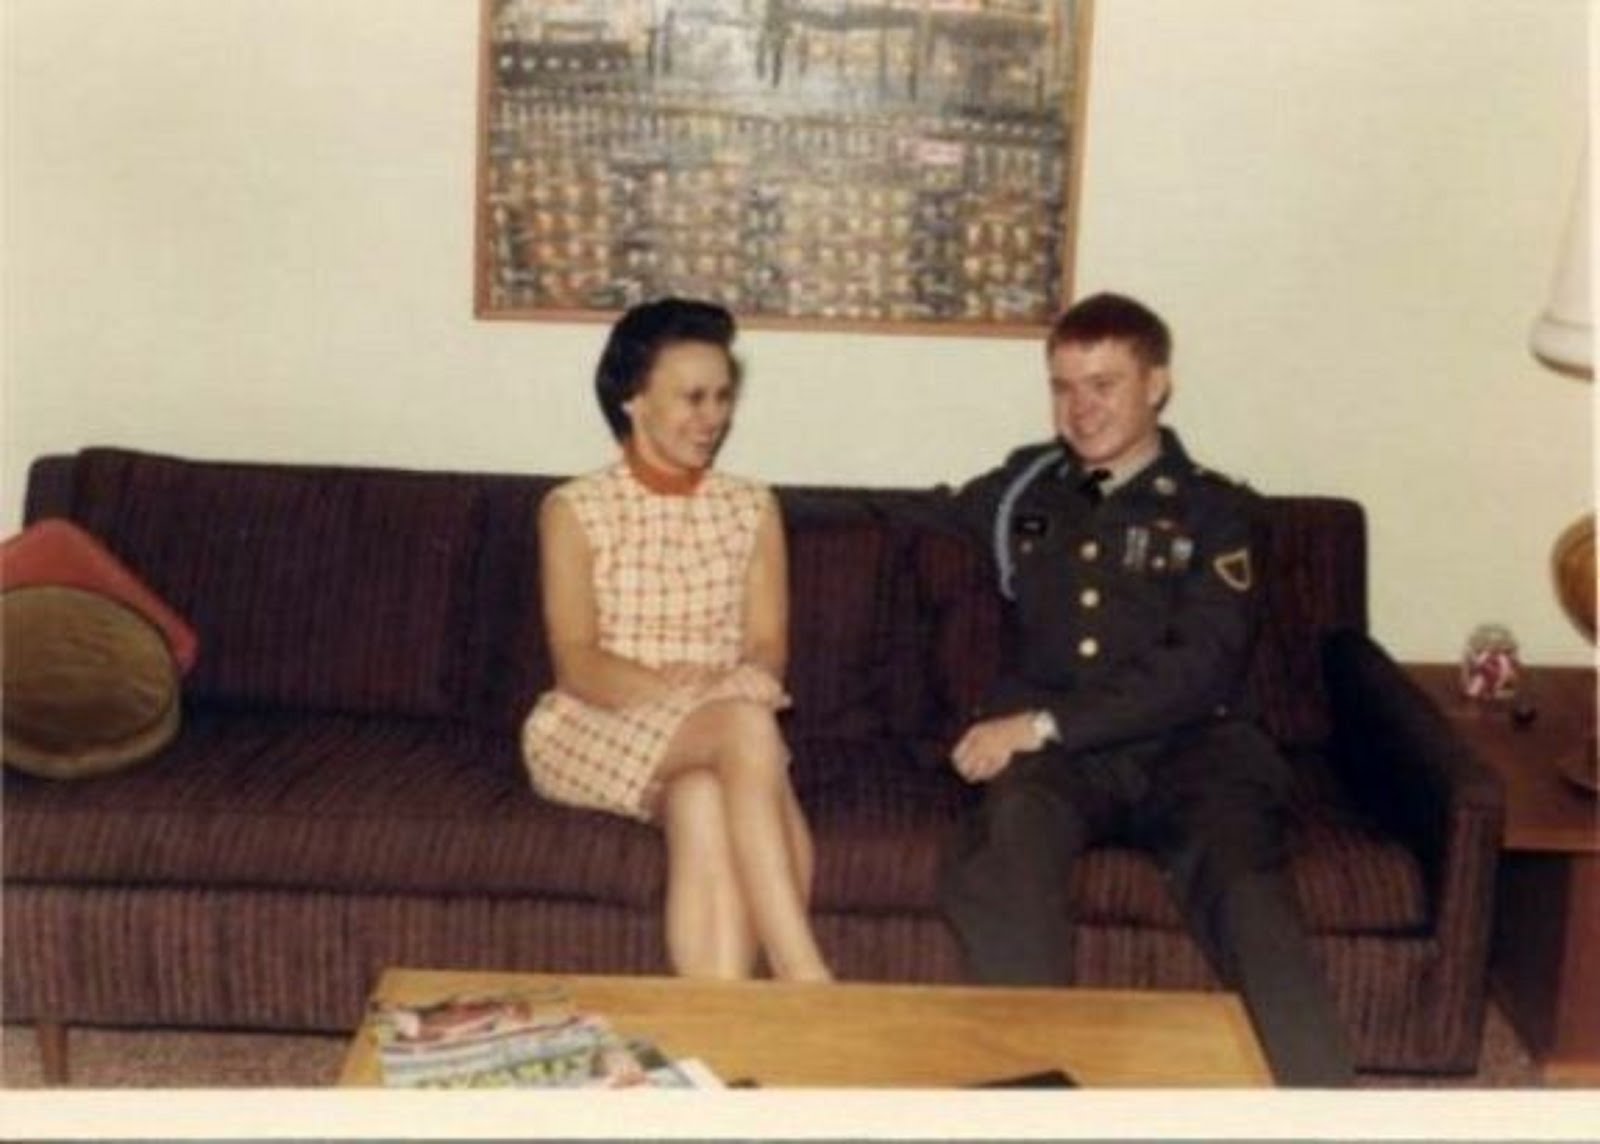 MY MOM IRENE V. PAYNE WITH ME PFC GREG PAYNE ON IN UNIFORM AND ON MY WAY TO VIETNAM - JAN 19, 1969